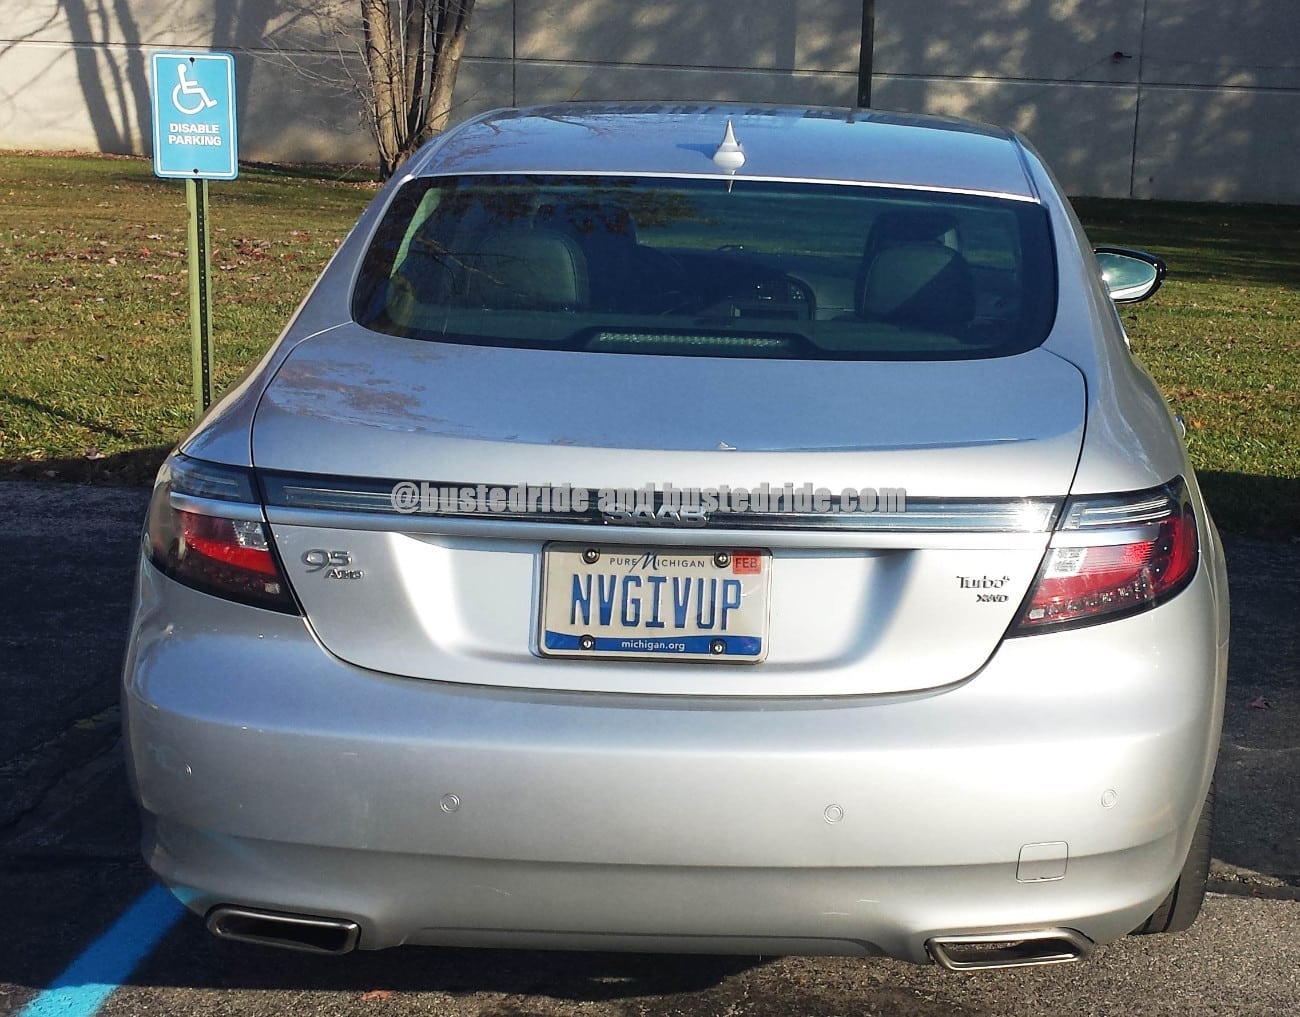 NVGIVUP - Vanity License Plate by Busted Ride